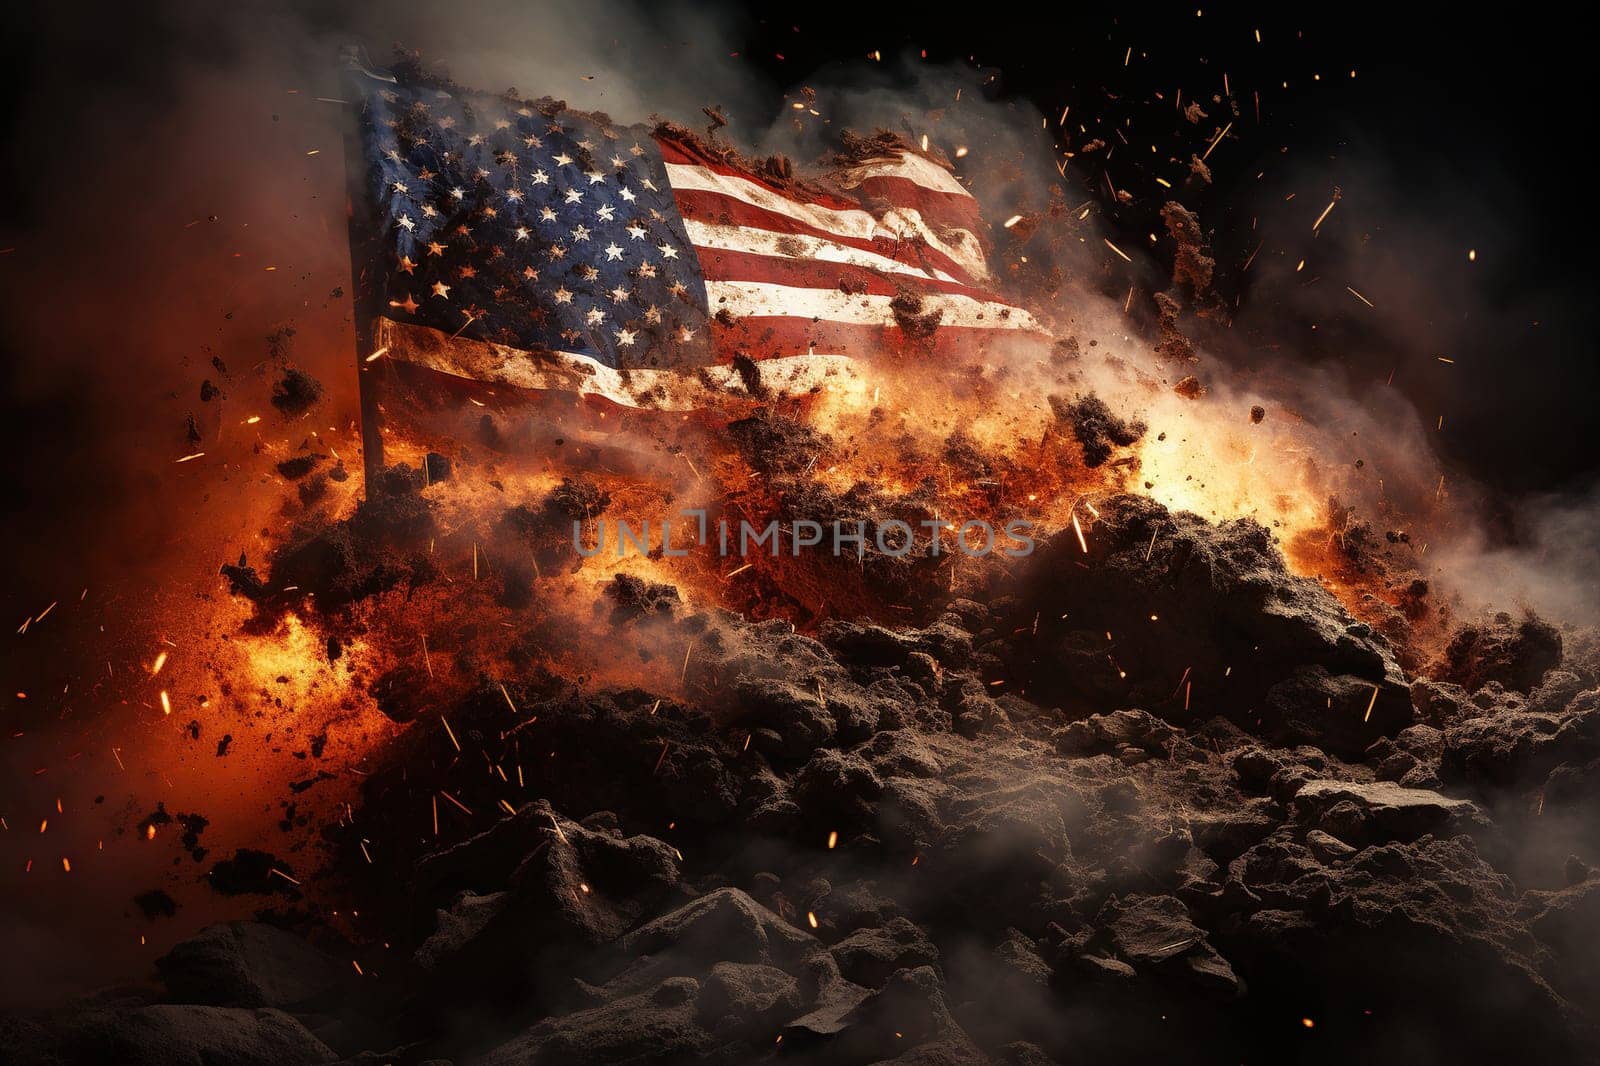 The US flag is on fire and puffs of smoke.